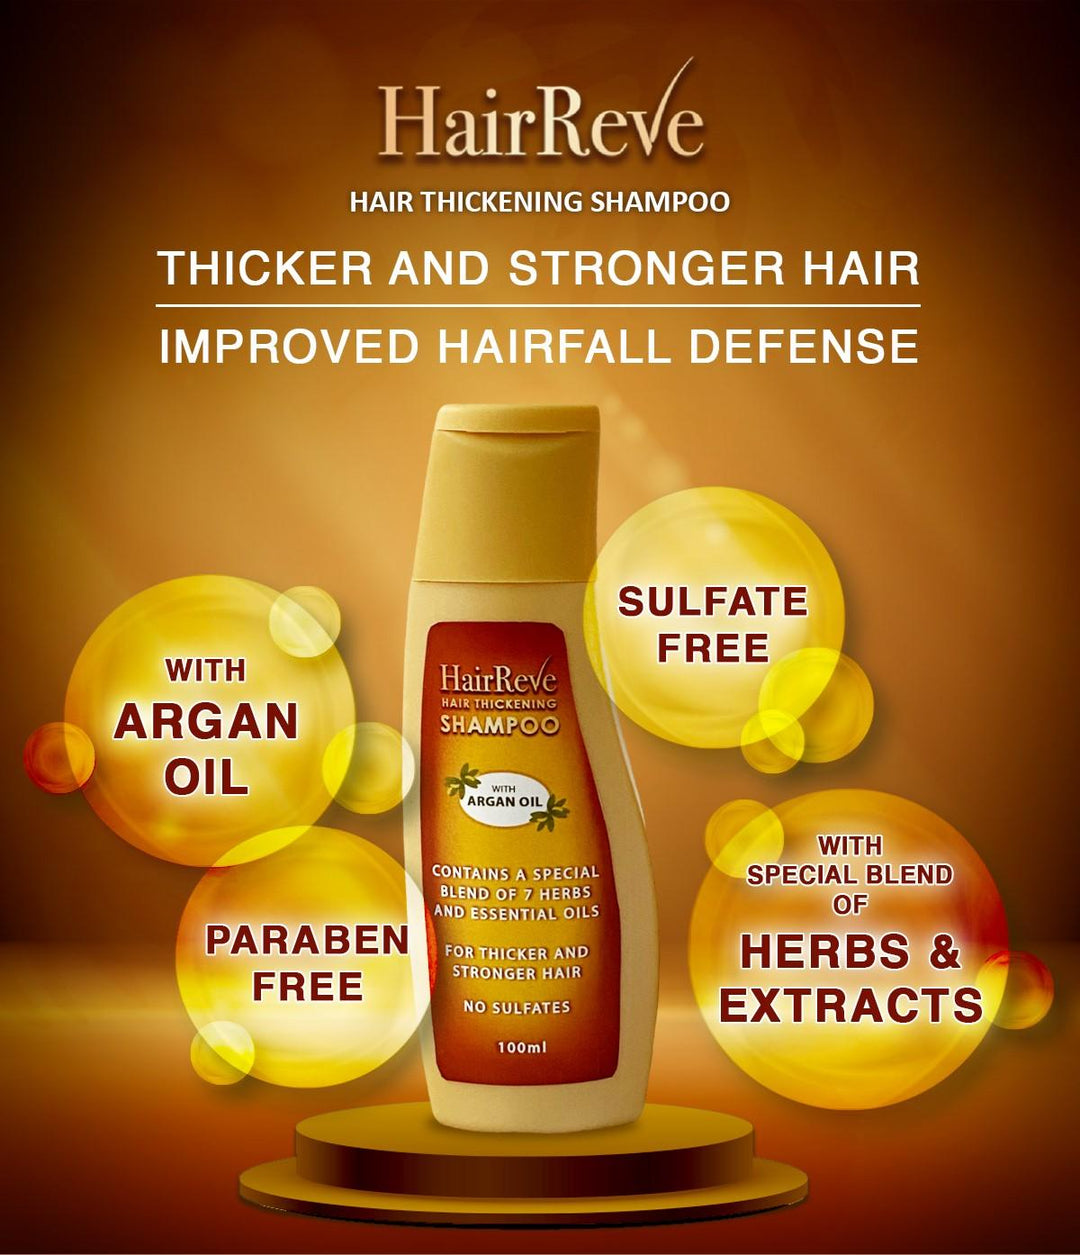 Hairreve Hair Thickening Sulfate-Free Shampoo with Argan Oil, 8 Herb Extracts & Essential Oils - 100ml - HairReve